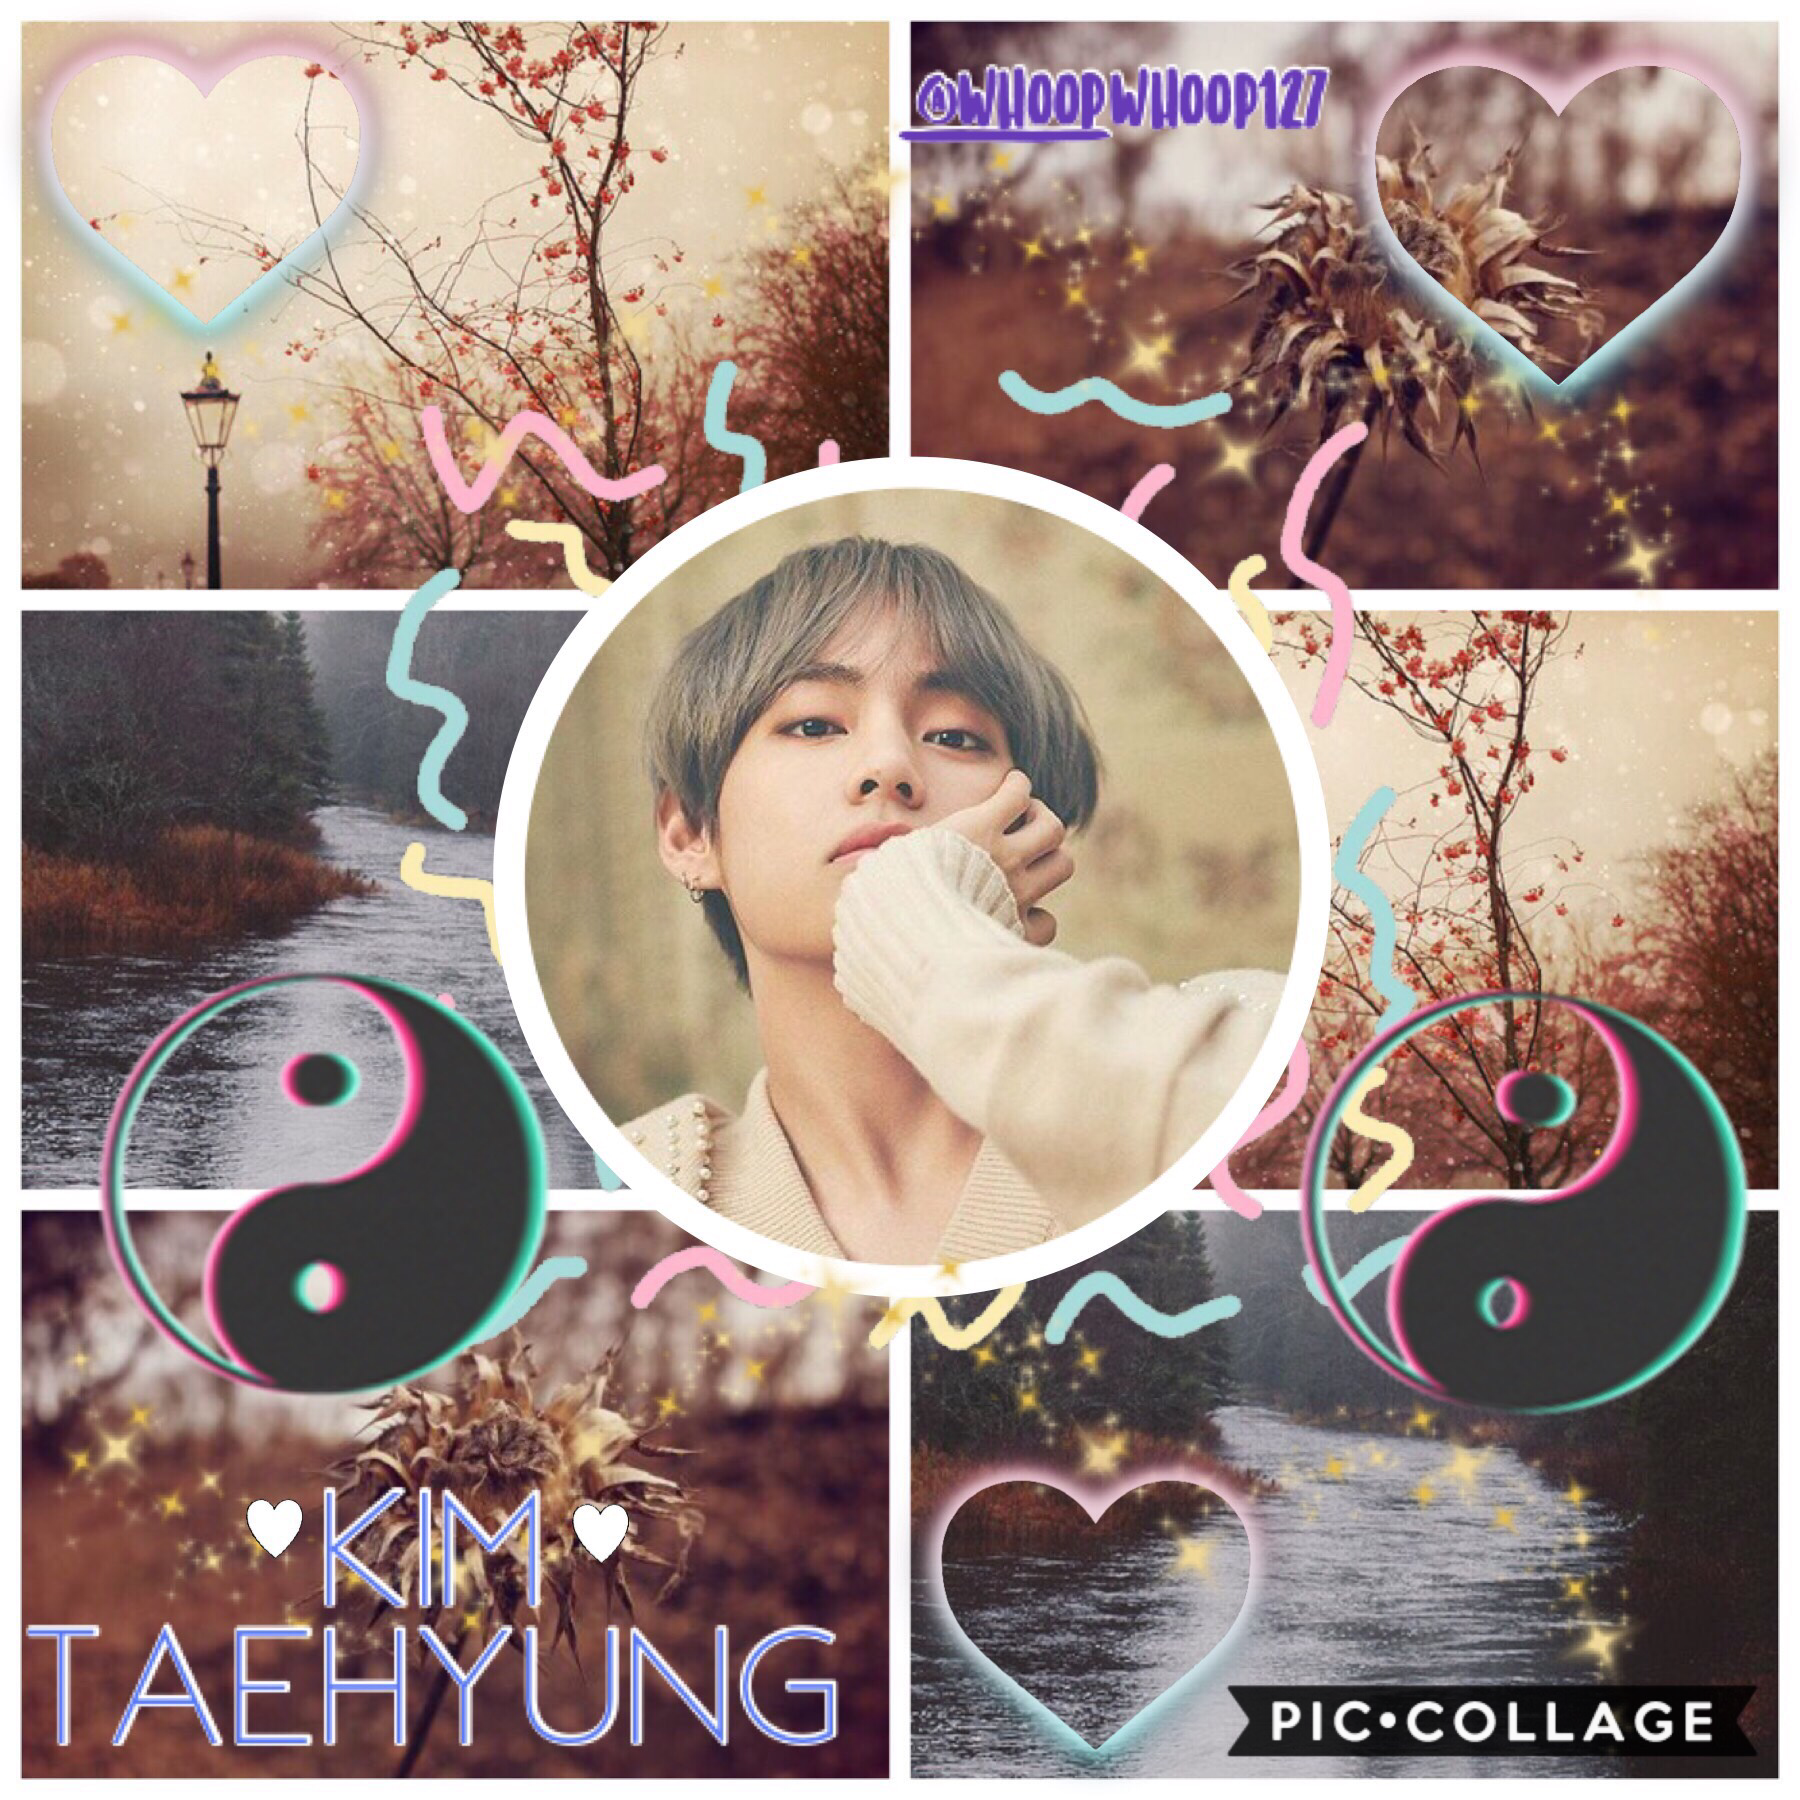 •🚒•
🍂V~BTS🍂
Edit for @-Saccharine-💞
Q:Do you guys like requests every season? Or is it too much?

❤️❤️❤️❤️💝💞💞💞💓💓💗💗💖💘💘💘💘❣️❣️❣️❣️❣️💕💕💕💕💙💙💚💛💛💛💚💕❣️💕💕❣️❤️❤️💜💜💜💞💞💖💝💘💘💕💖💙💚💖💛💛❣️❣️💕🖤💜💜❤️❤️💛💛💙💕💘💗💝💞